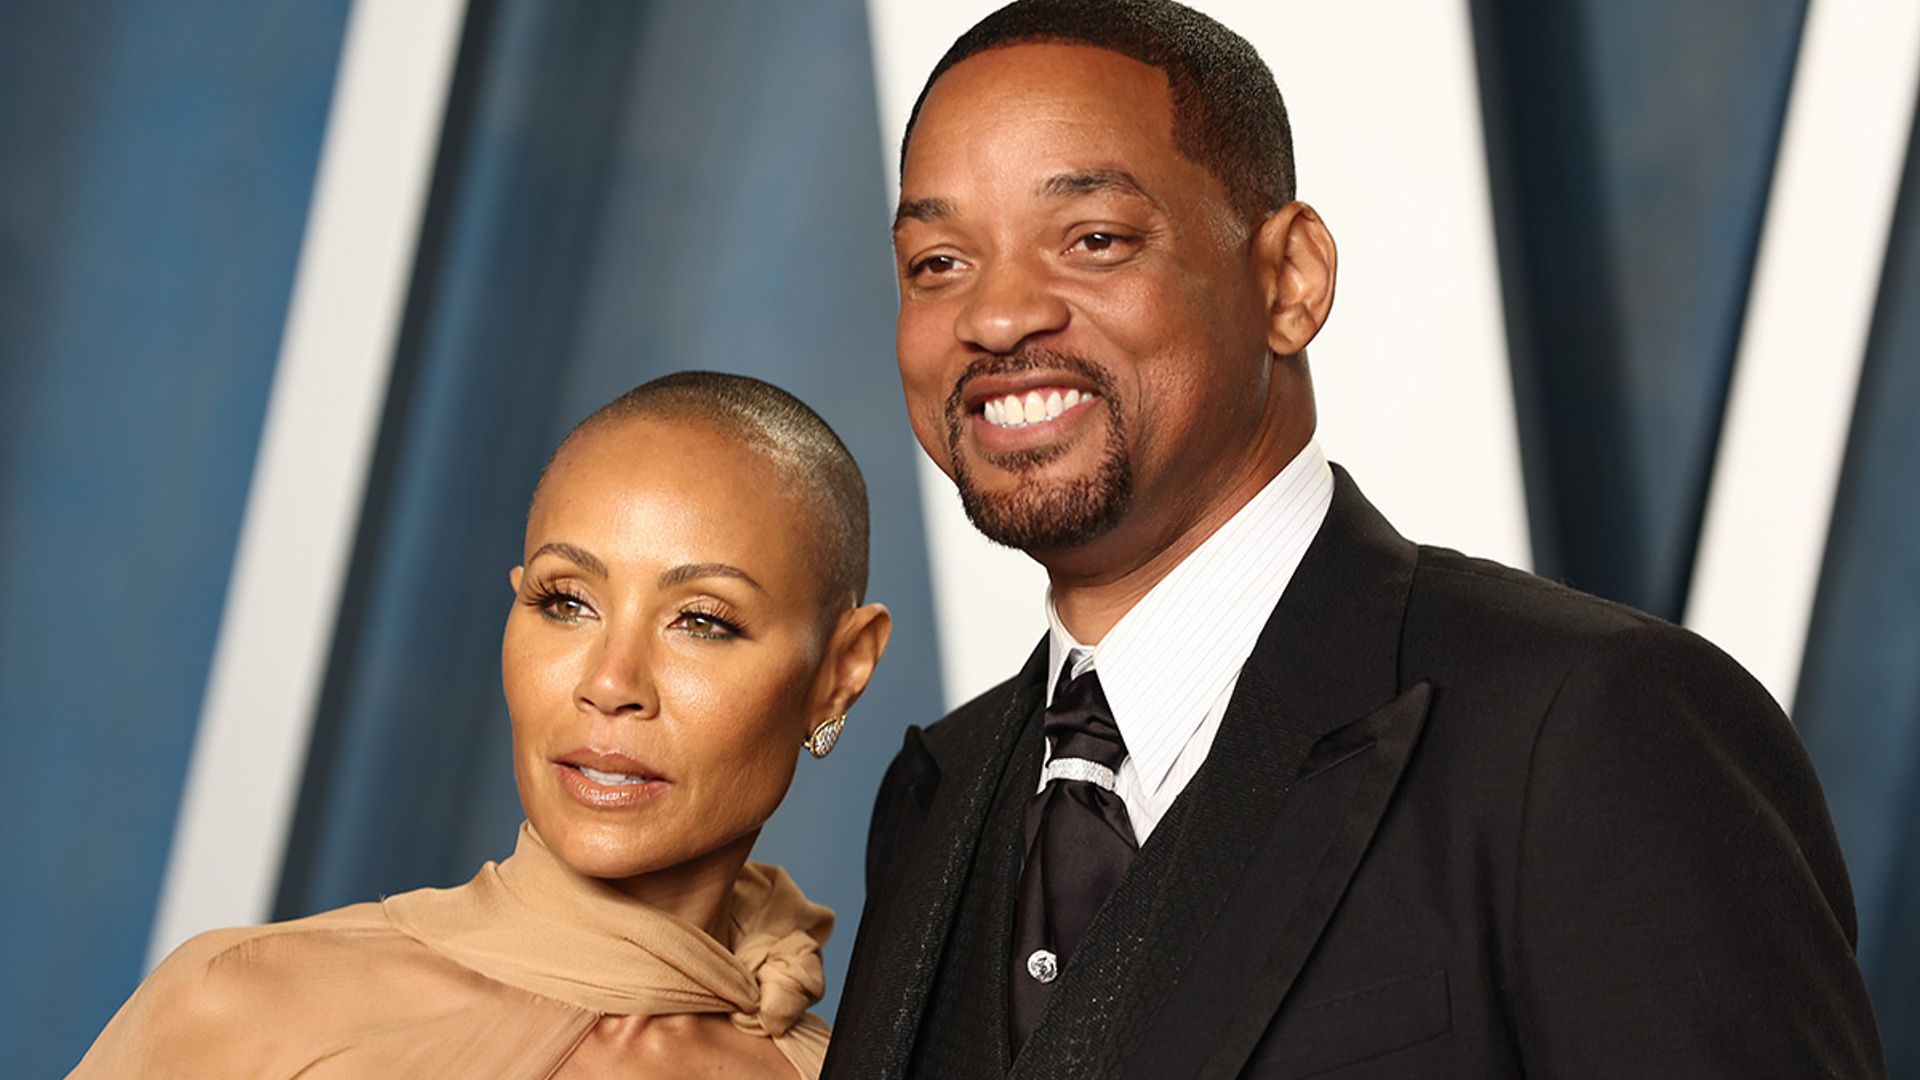 oscar-winner will smith and jada pinkett smith's children: everything you need to know | hello!